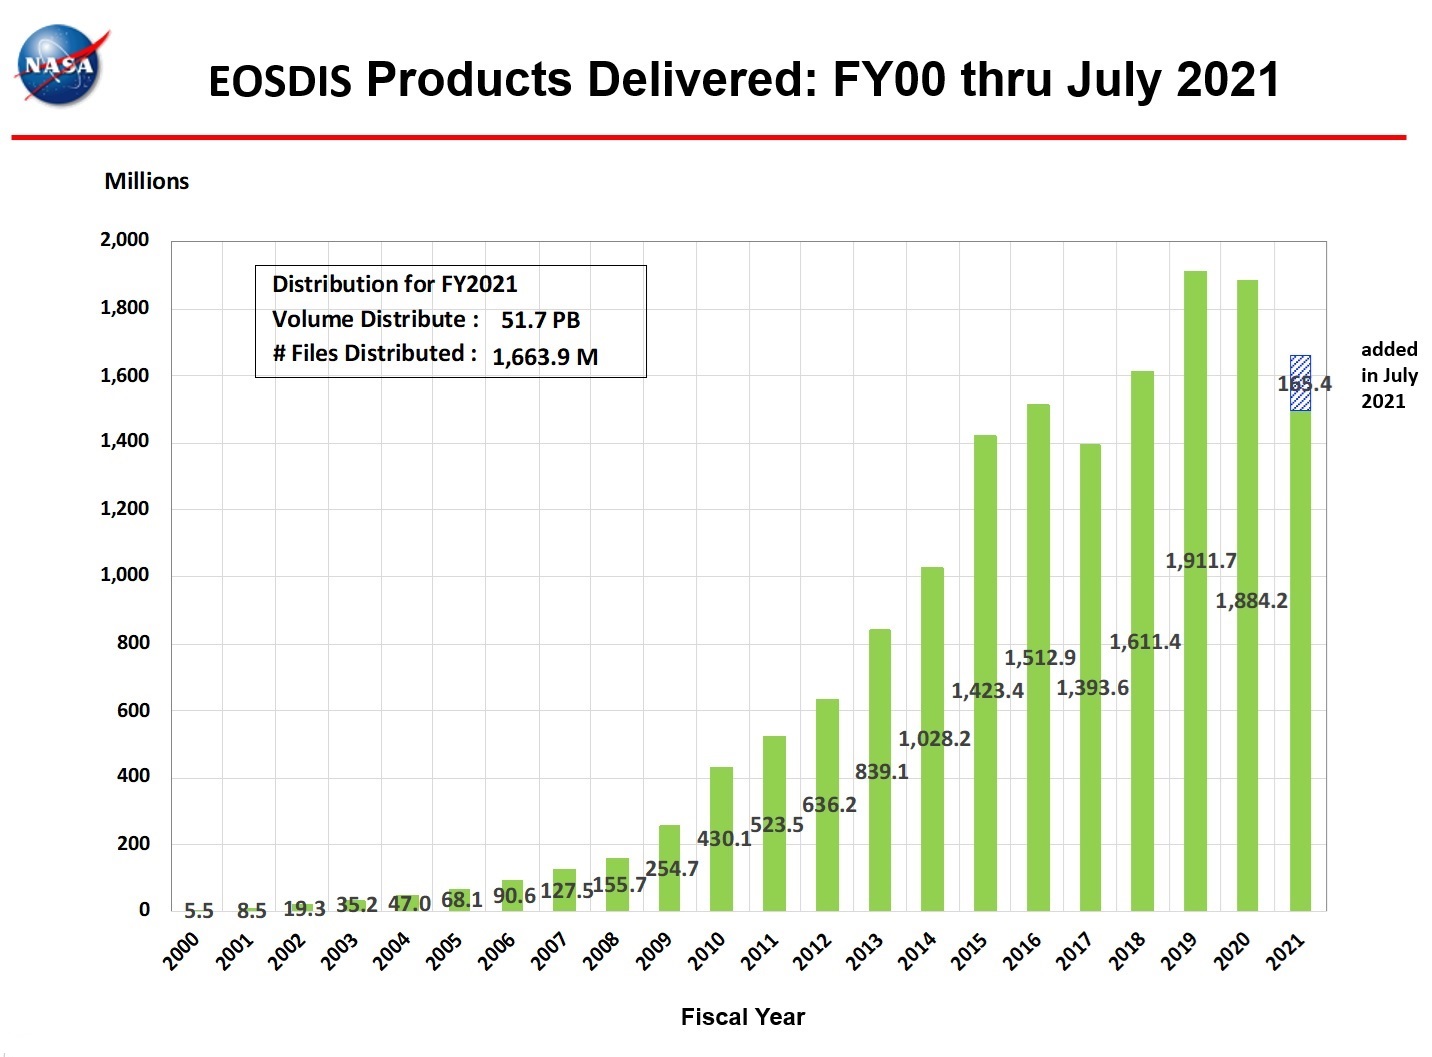 EOSDIS Products delivered 7-2021